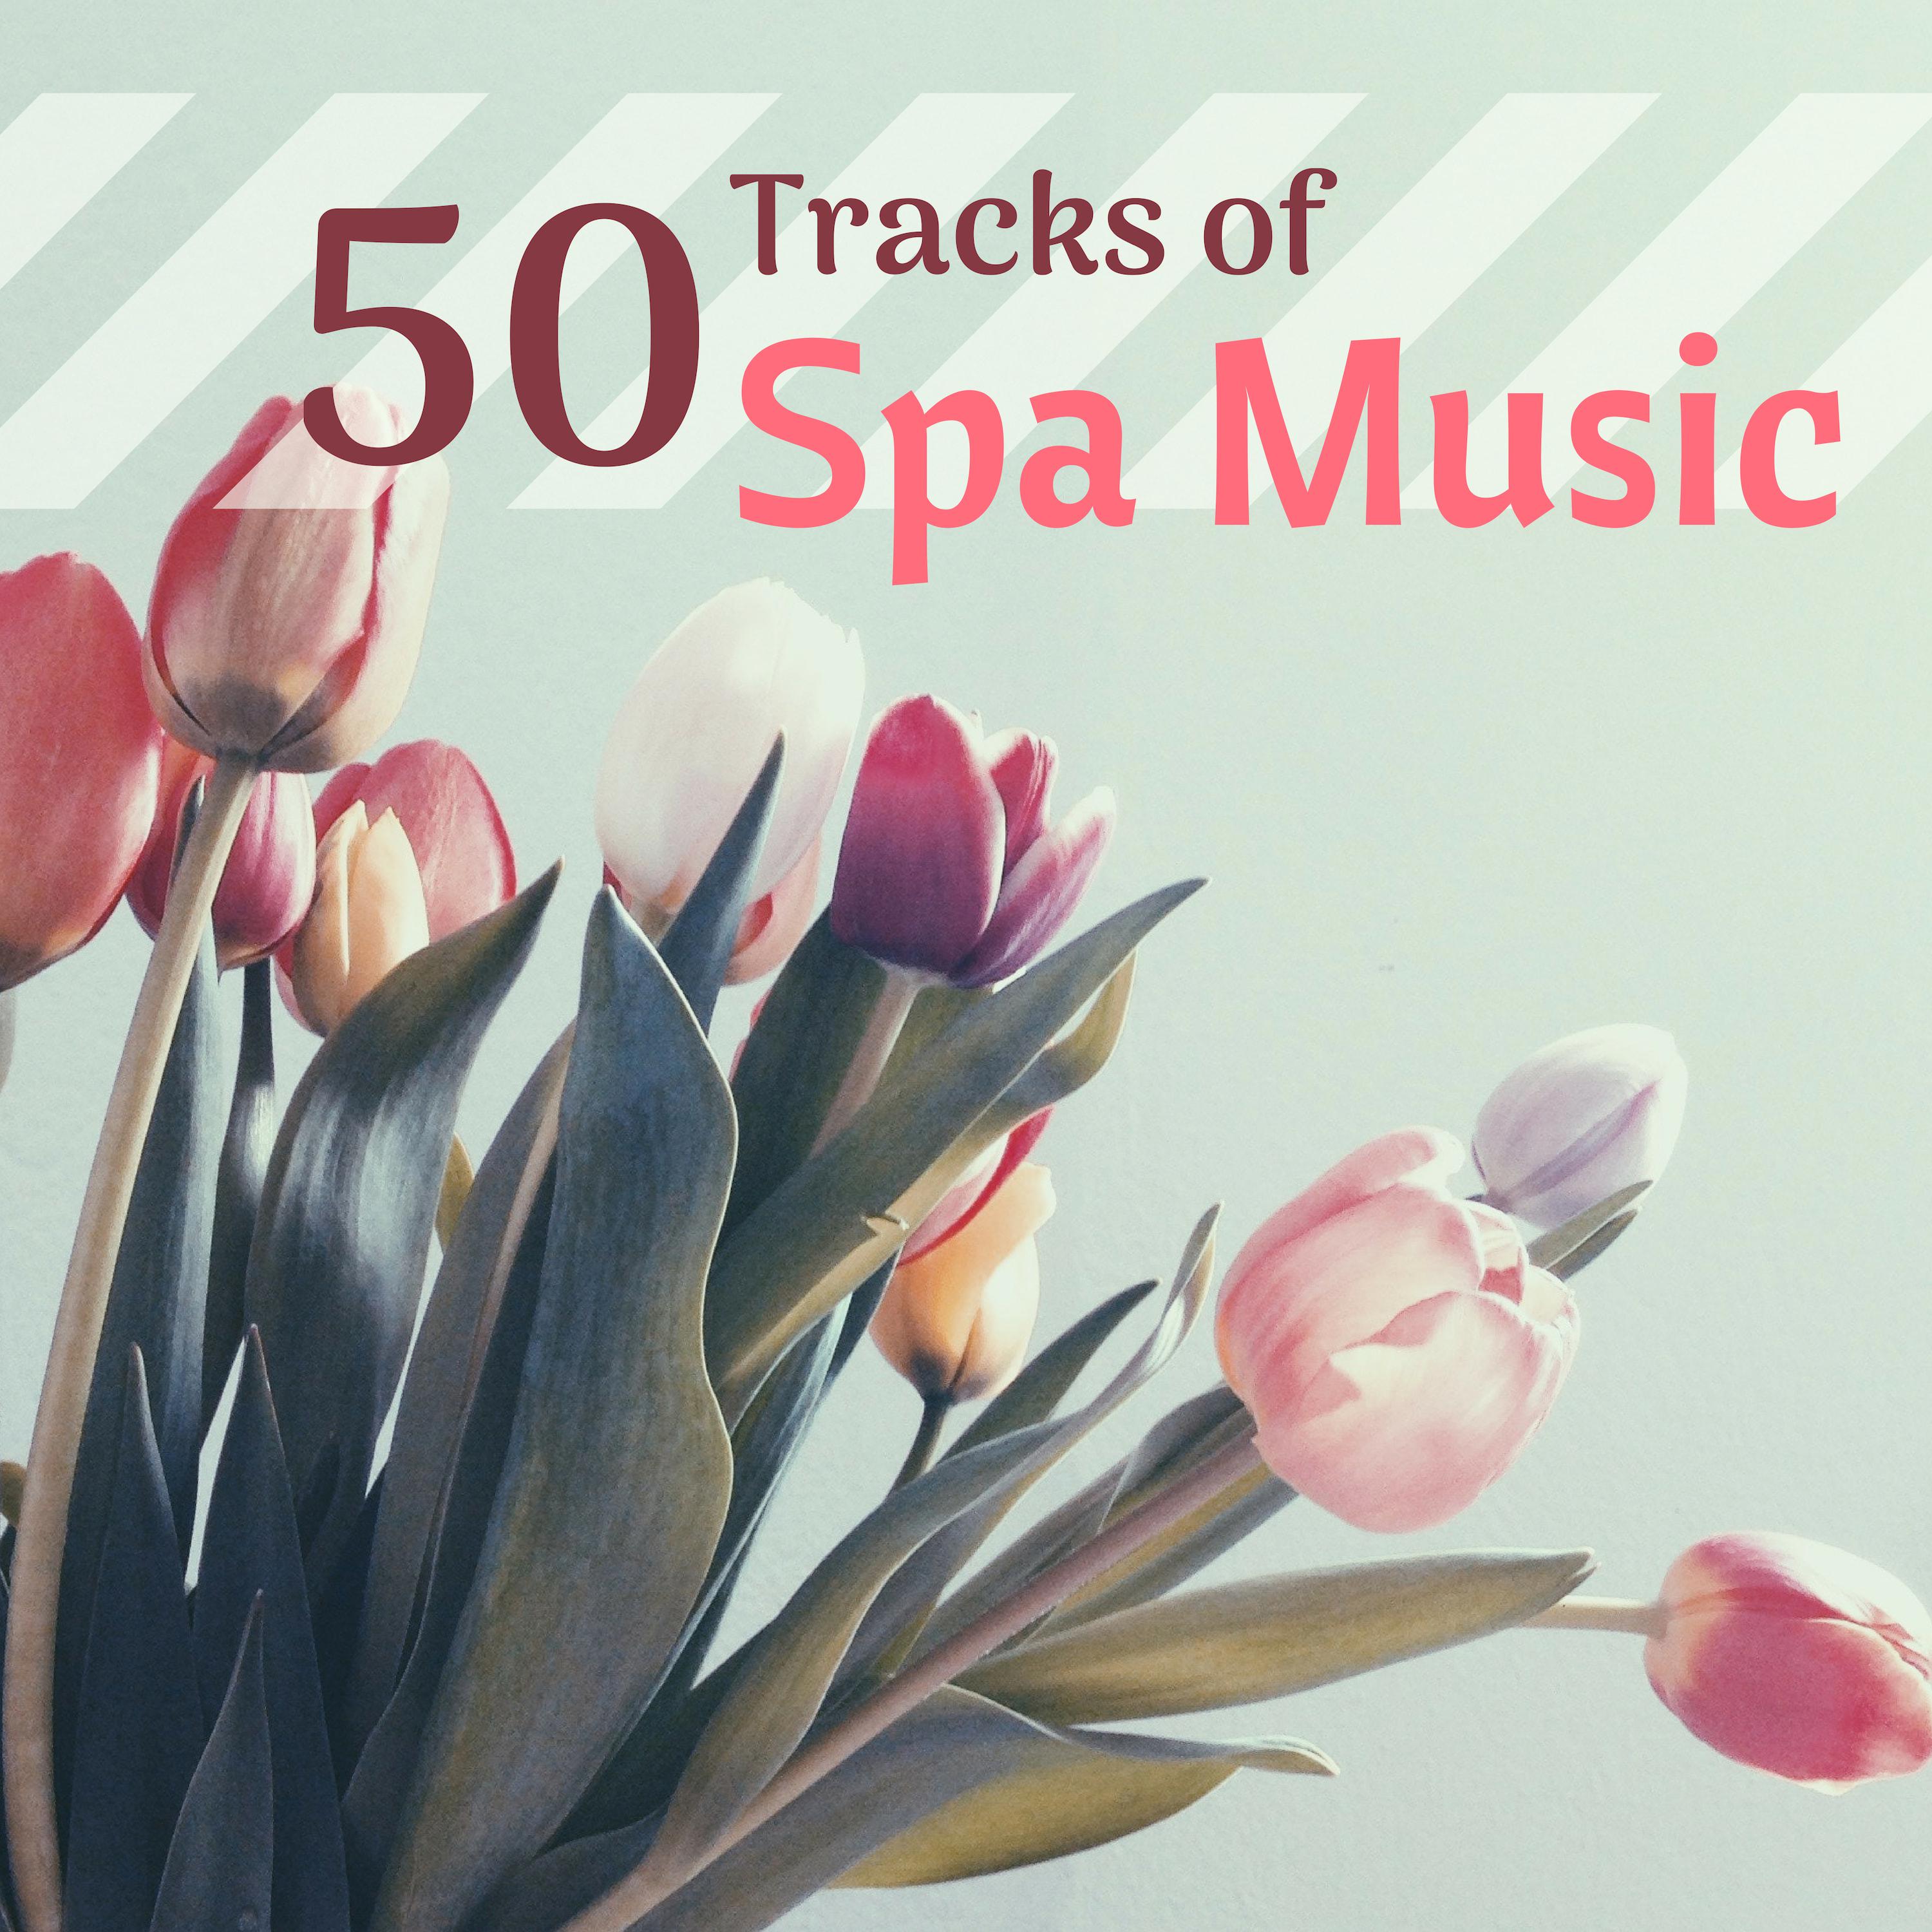 50 Tracks of Spa Music - Collective Hotel & Wellness Songs